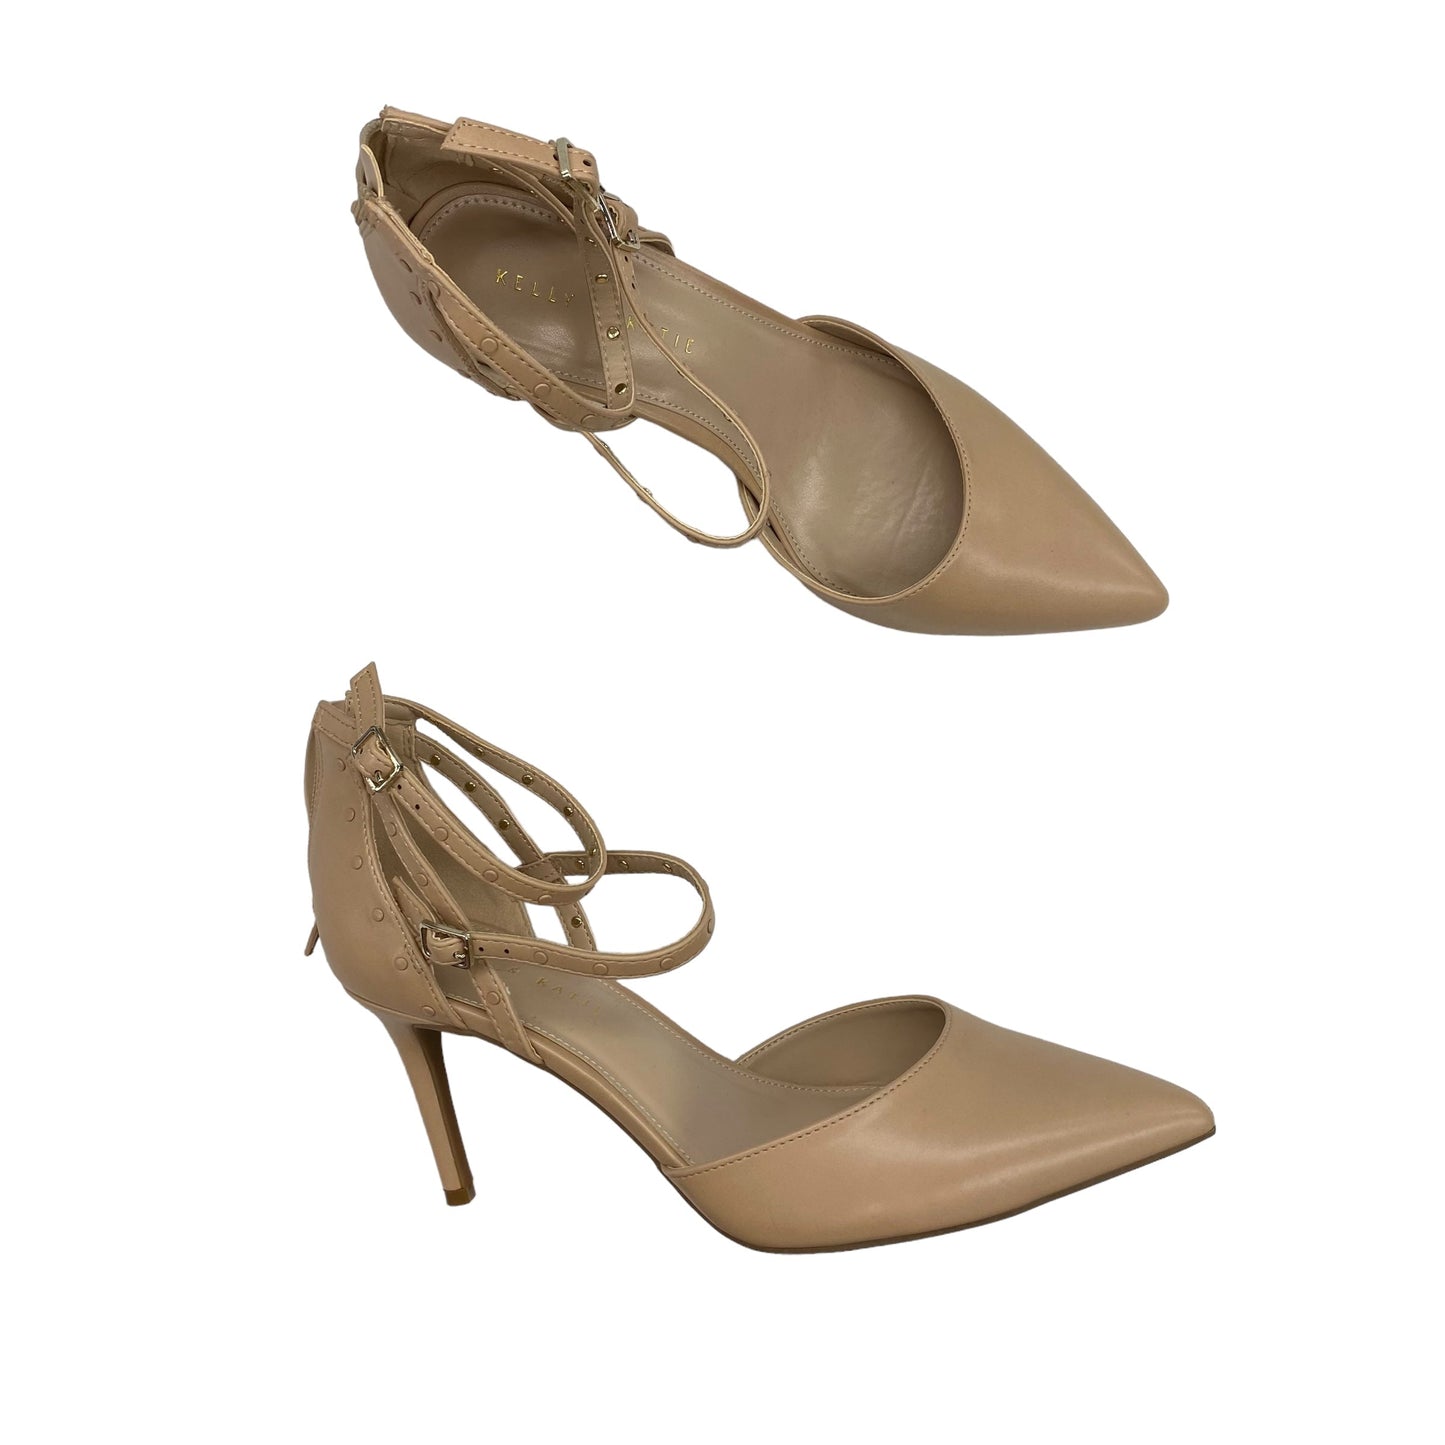 Tan Shoes Heels Stiletto Kelly And Katie, Size 11